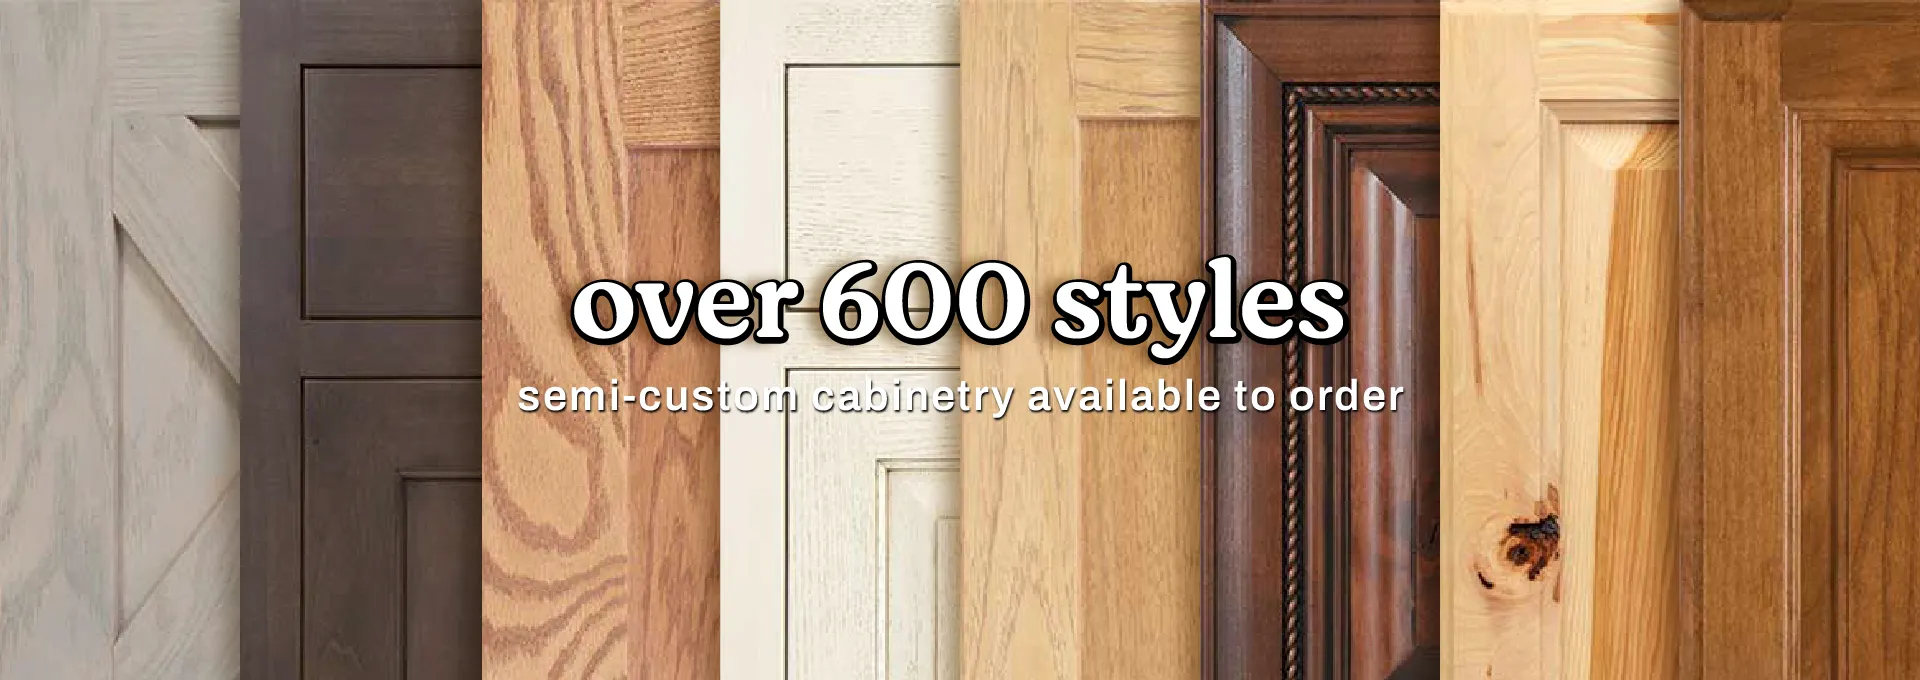 over 600 styles available! 27